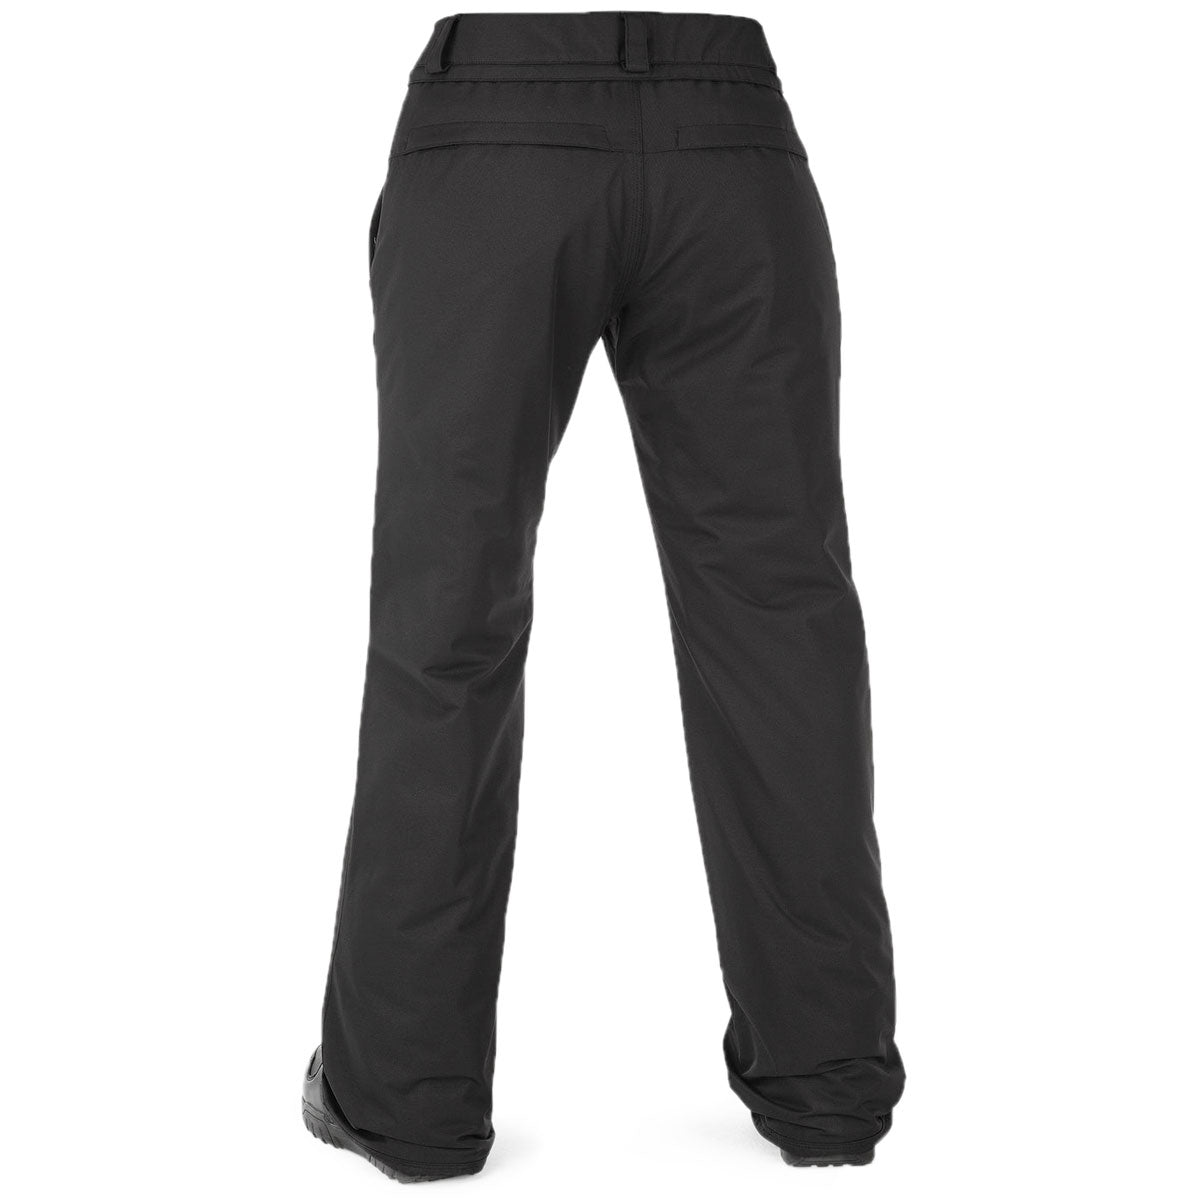 Volcom Womens Frochickie Ins Snowboard Pants - Black image 2